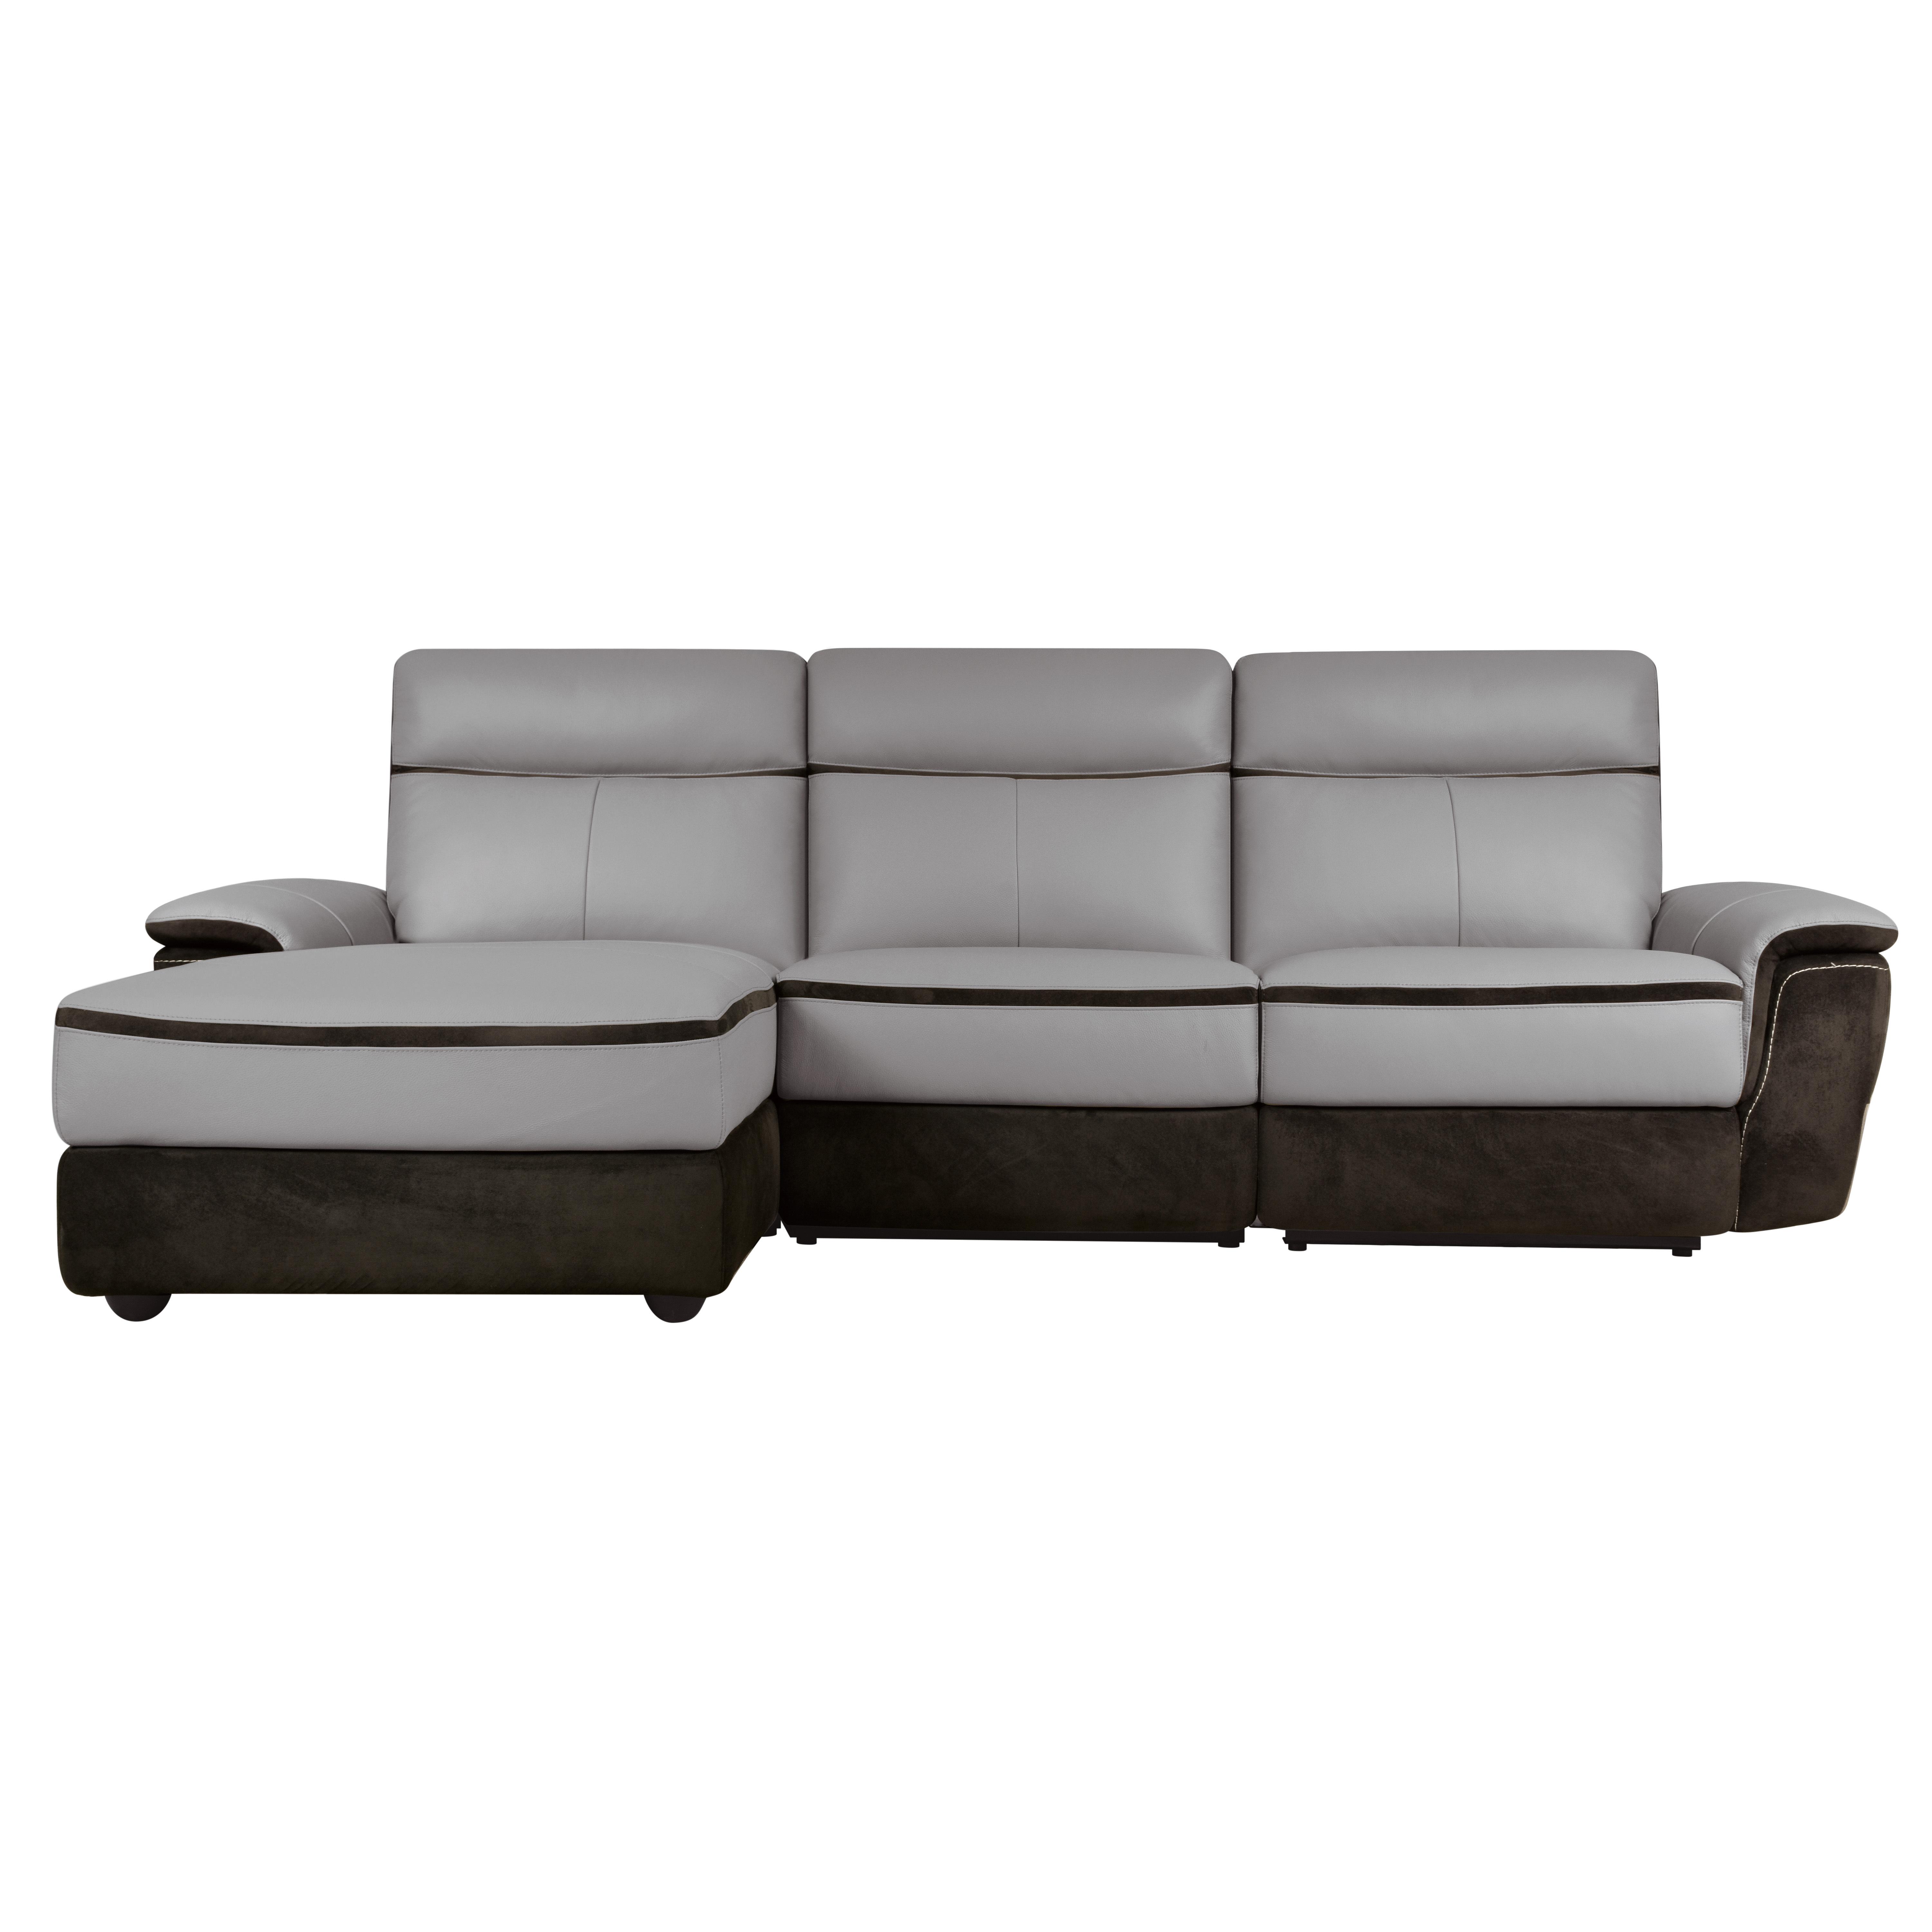 Modern Power Reclining Sectional 8318*35LRR Laertes 8318*35LRR in Charcoal Top grain leather